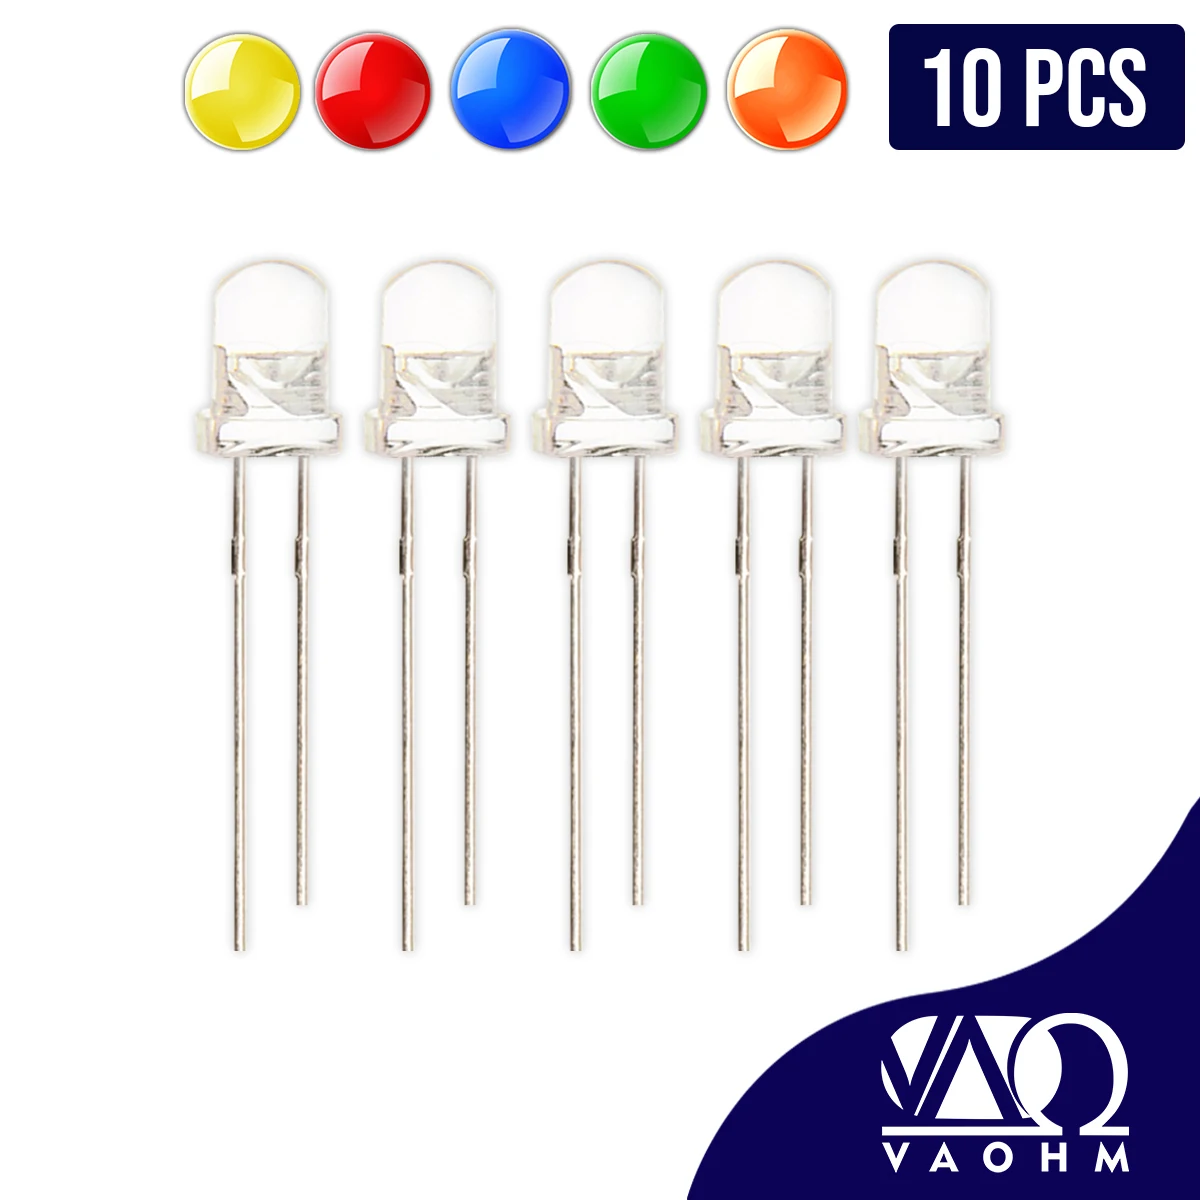 

LED F5 Water Clear Round 5mm Light Emitting Diode (RED/BLUE/GREEN/ORANGE/YELLOW/WHITE) 10PCS/LOT